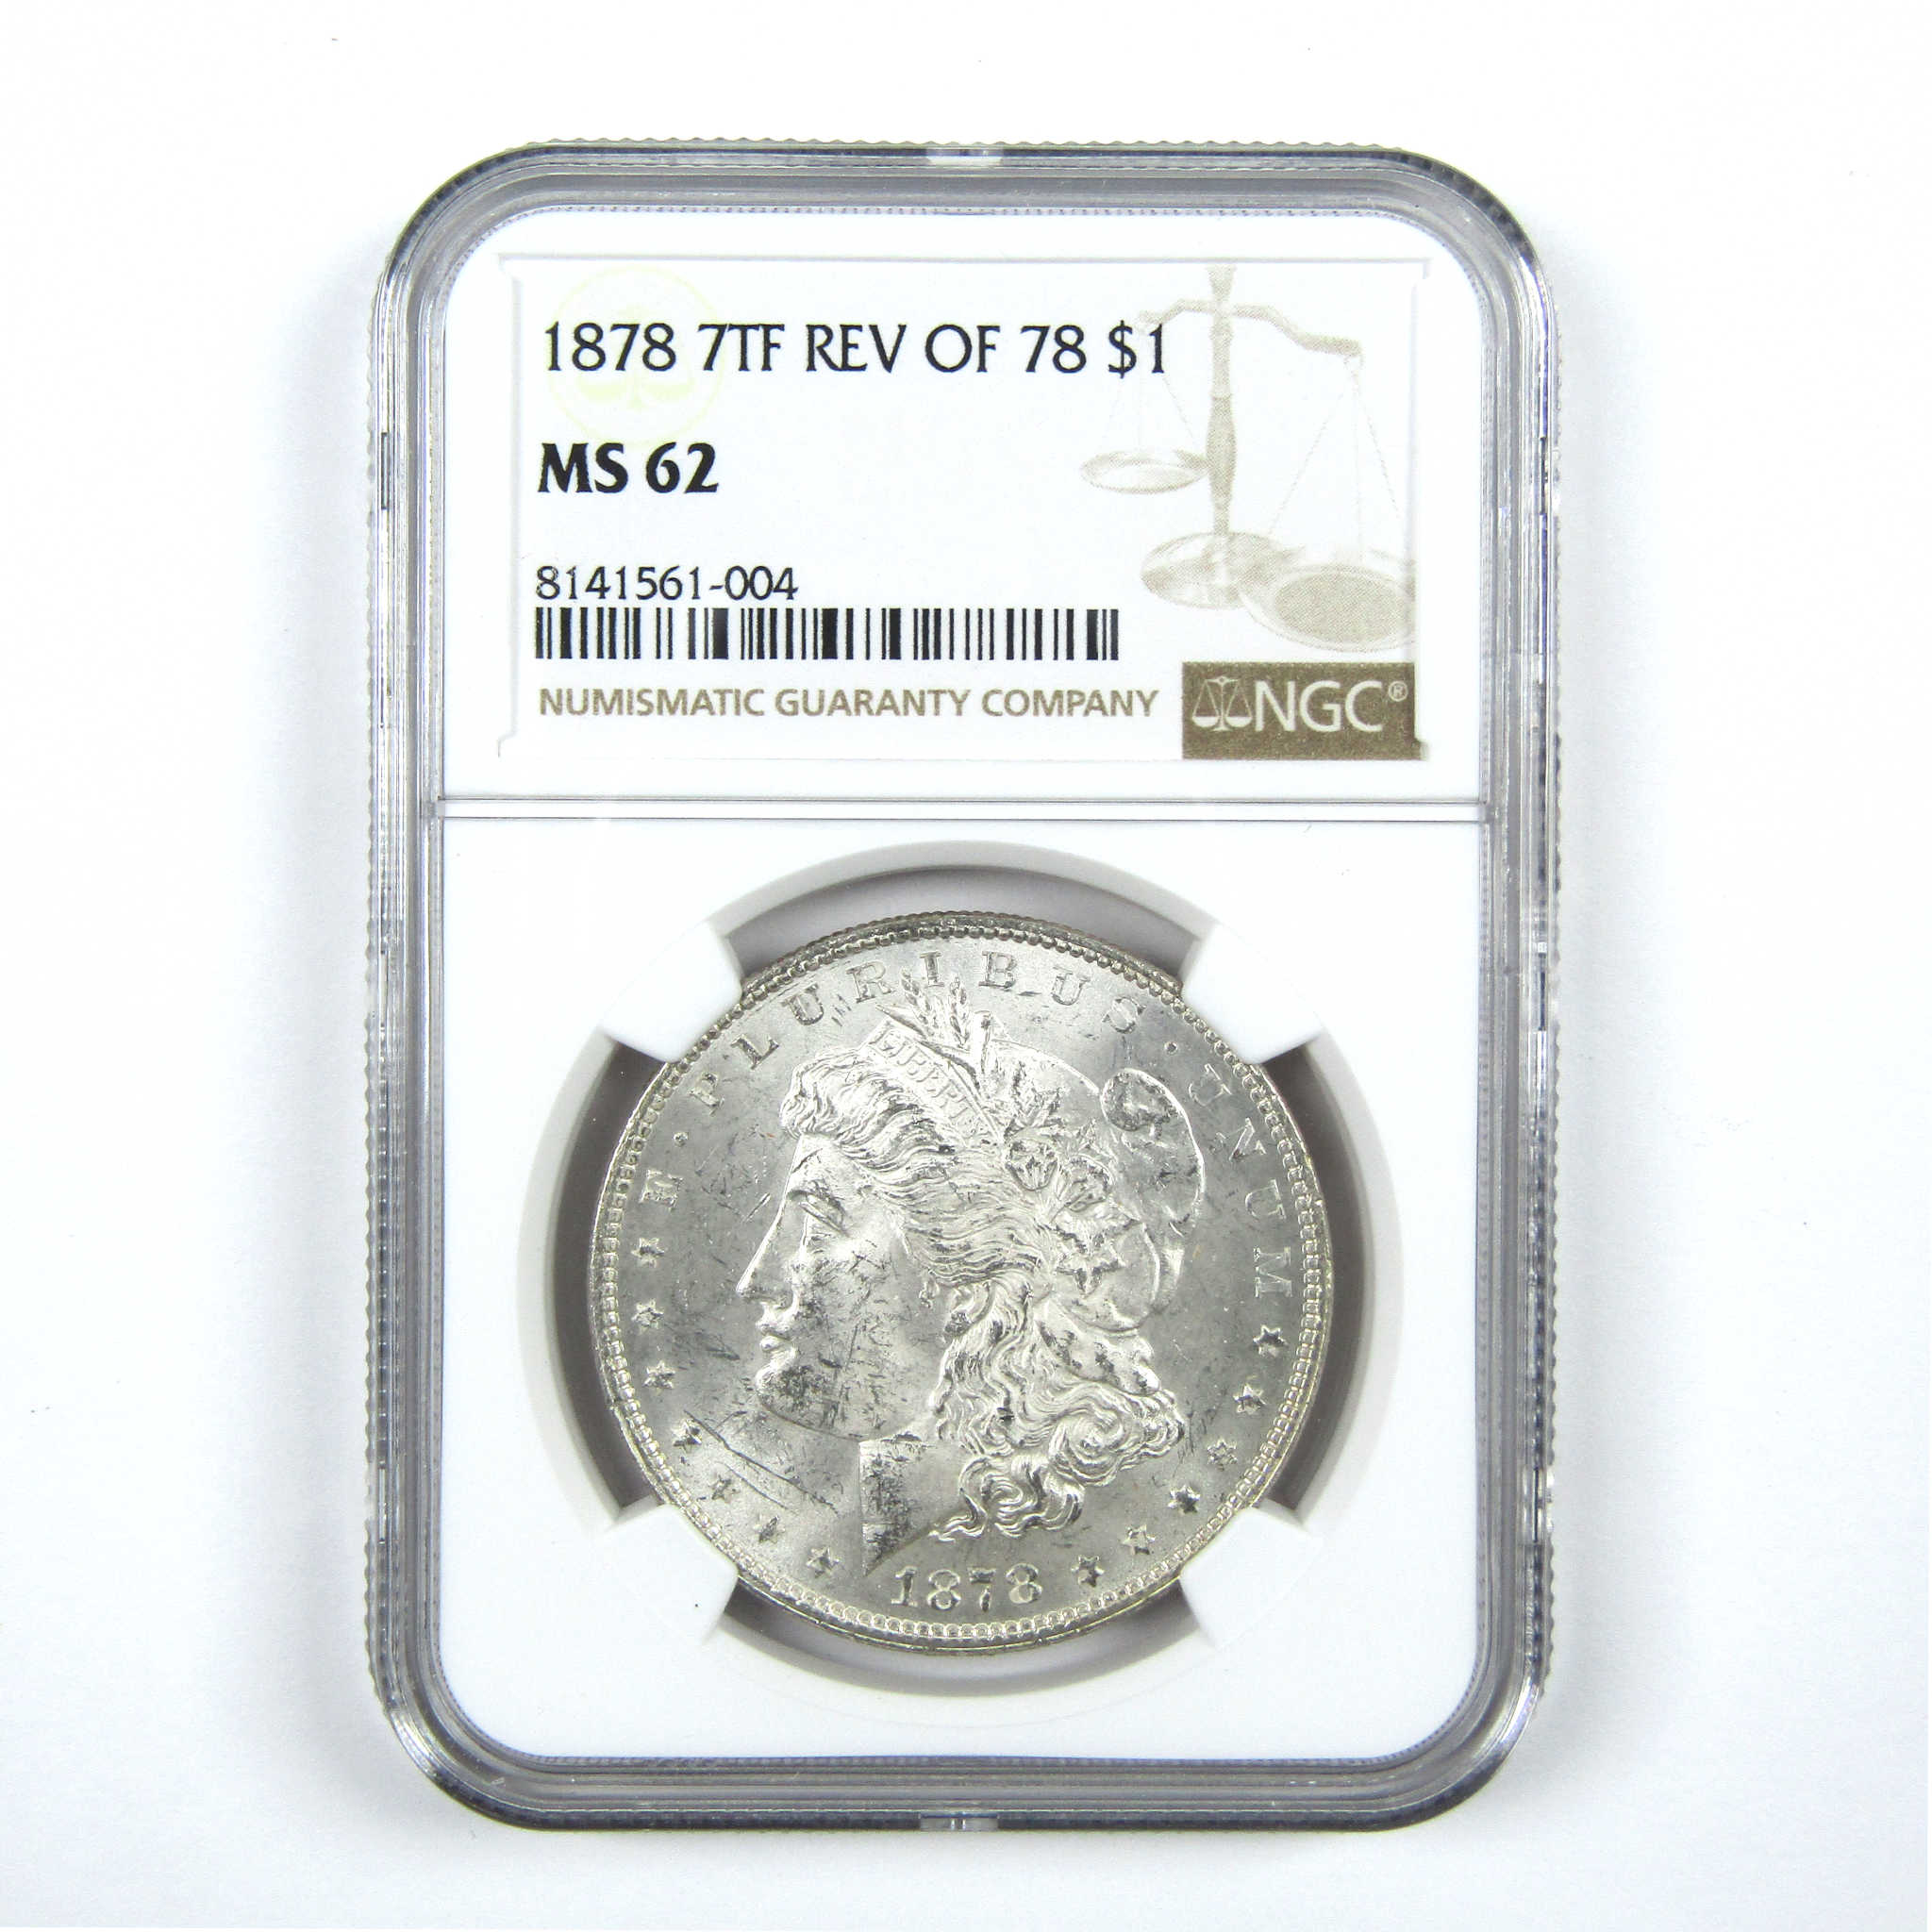 1878 7TF Rev 78 Morgan Dollar MS 62 NGC Uncirculated SKU:I14021 - Morgan coin - Morgan silver dollar - Morgan silver dollar for sale - Profile Coins &amp; Collectibles